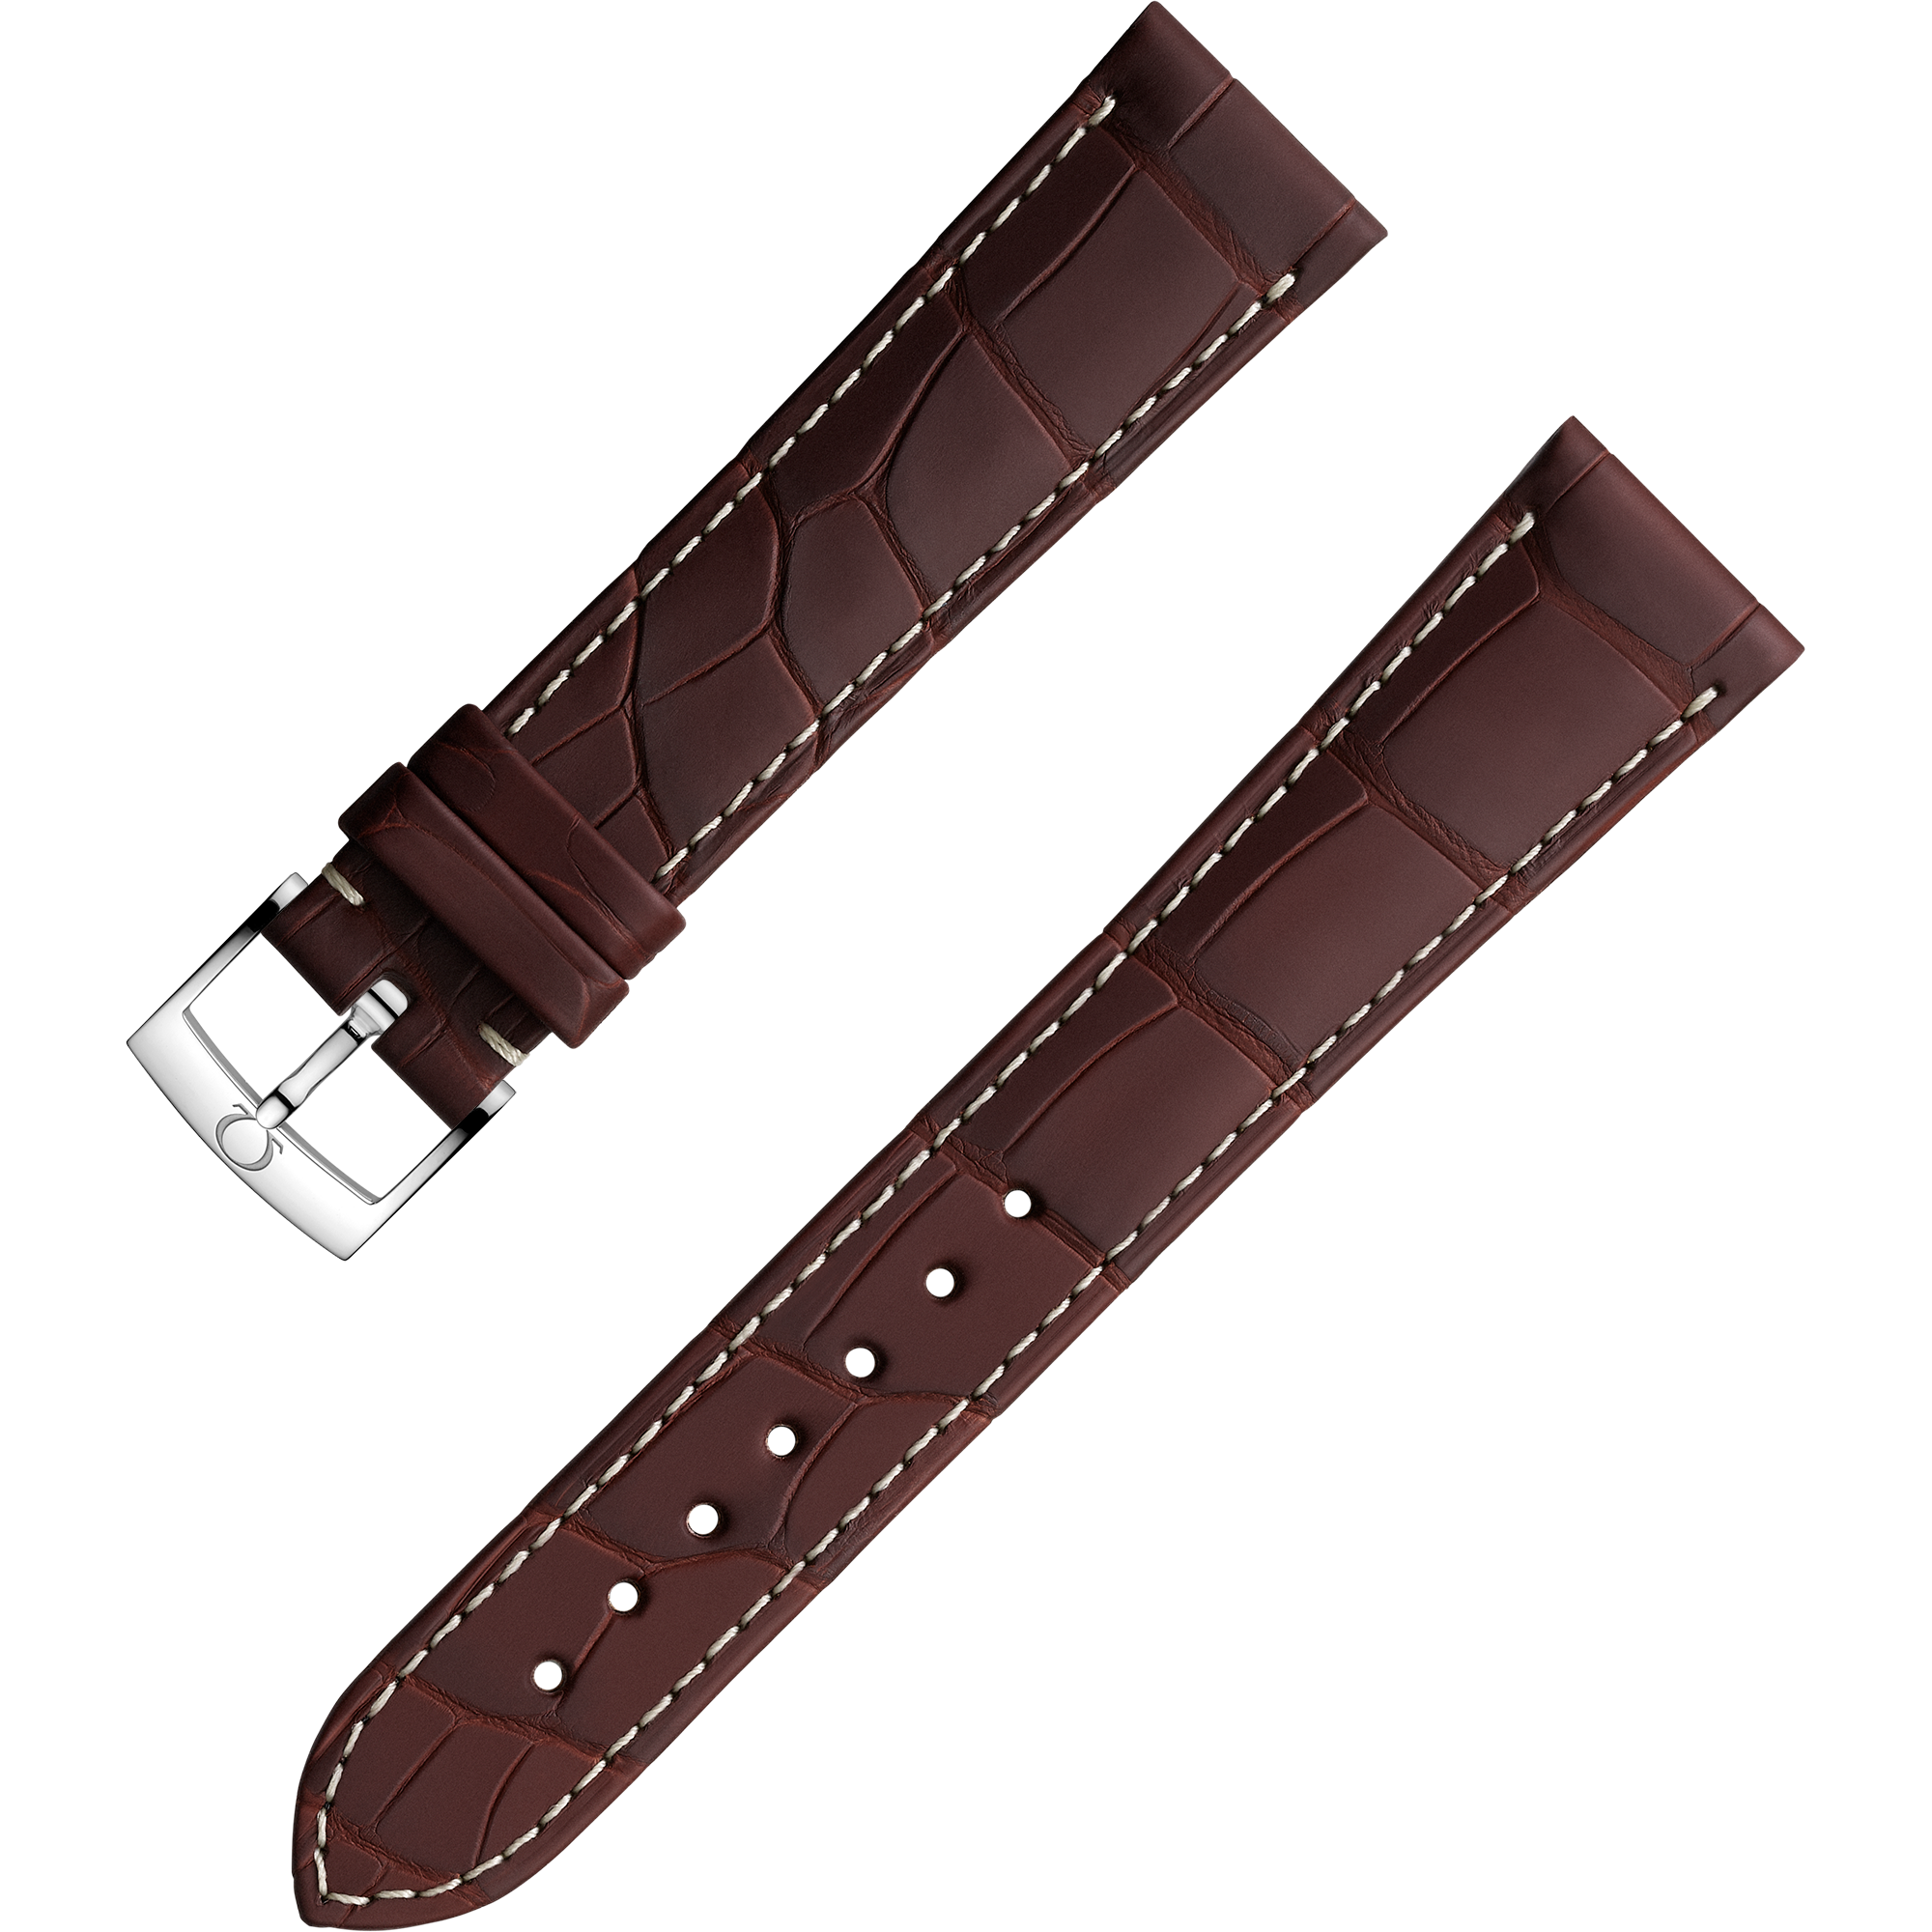 Two-piece strap - Brown alligator leather strap with pin buckle - 032CUZ003330W